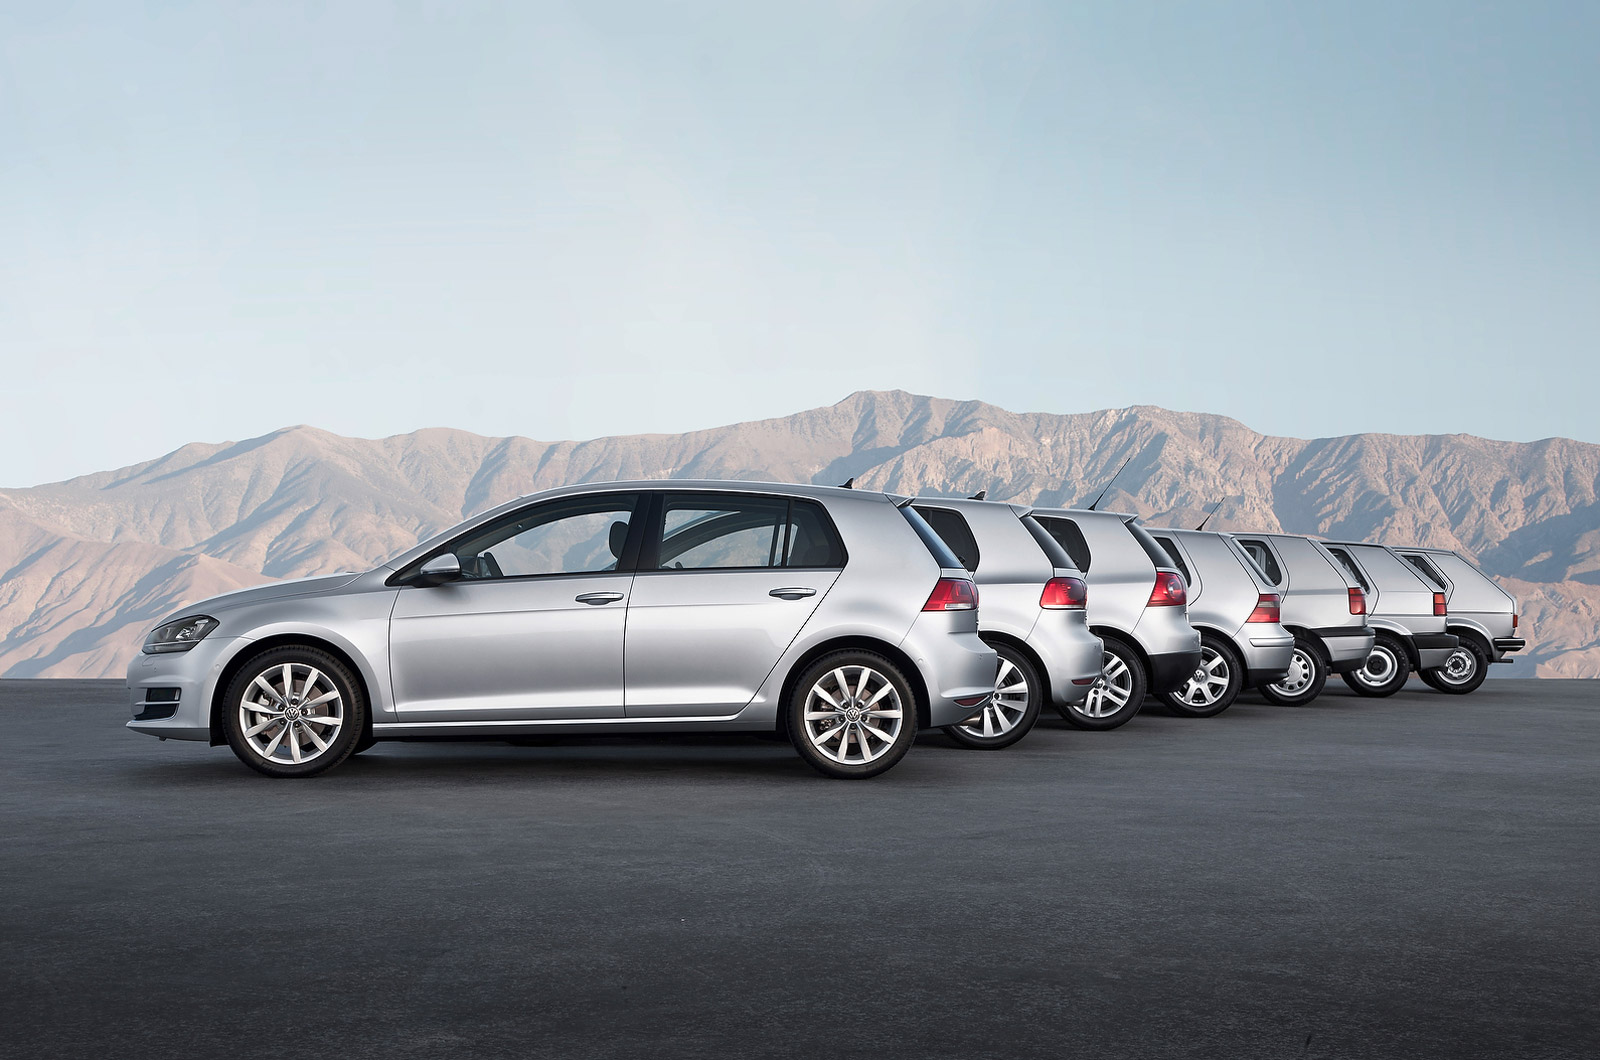 Volkswagen Golf Mk7 to launch all-new entry-level model in April